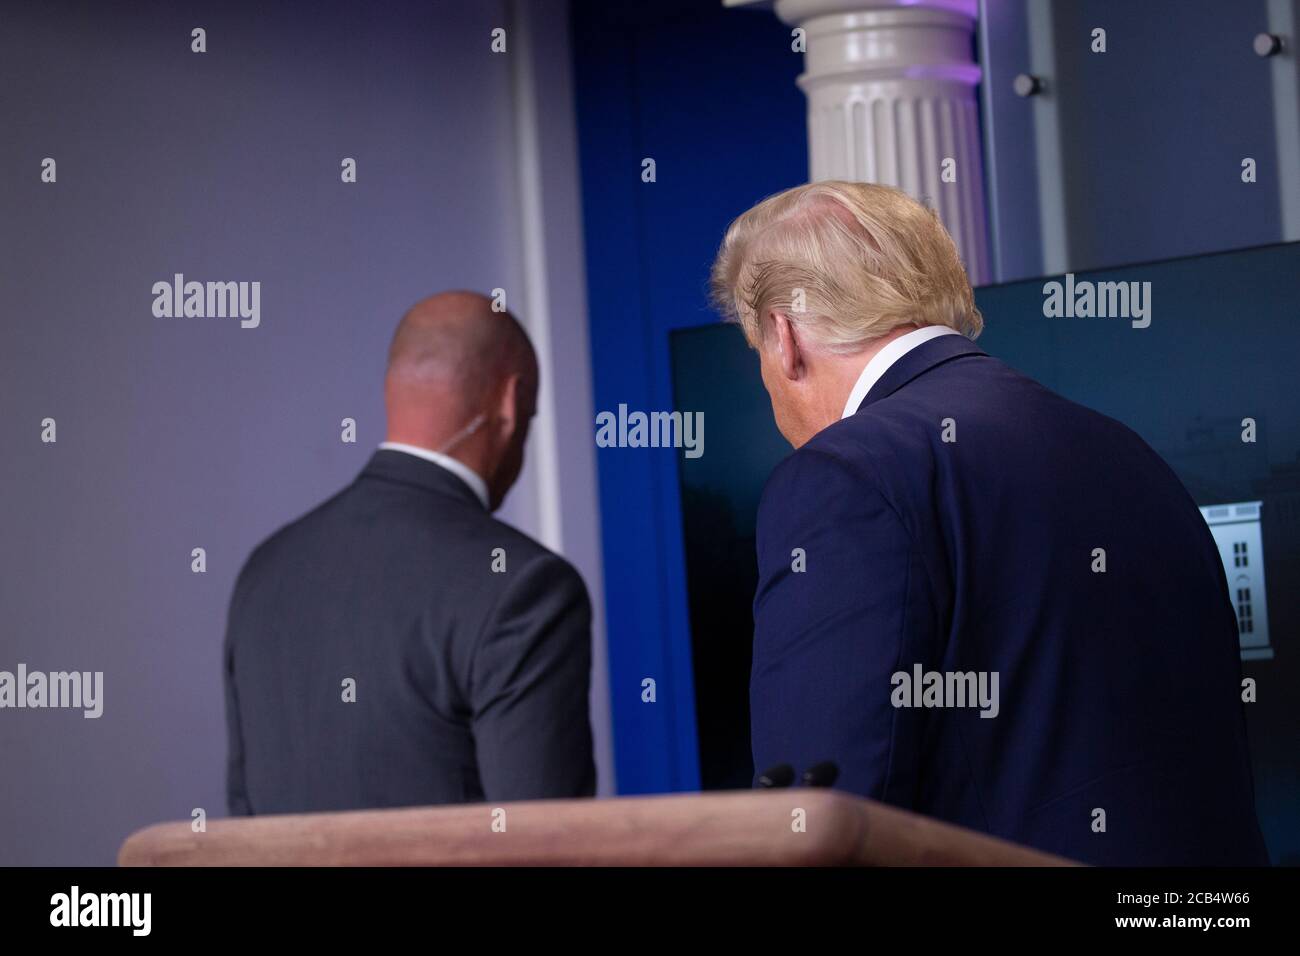 United States President Donald J. Trump is removed from the White House Briefing Room by a US Secret Service agent during a press conference in Washington, DC on Monday, August 10, 2020.Credit: Stefani Reynolds/Pool via CNP /MediaPunch Stock Photo